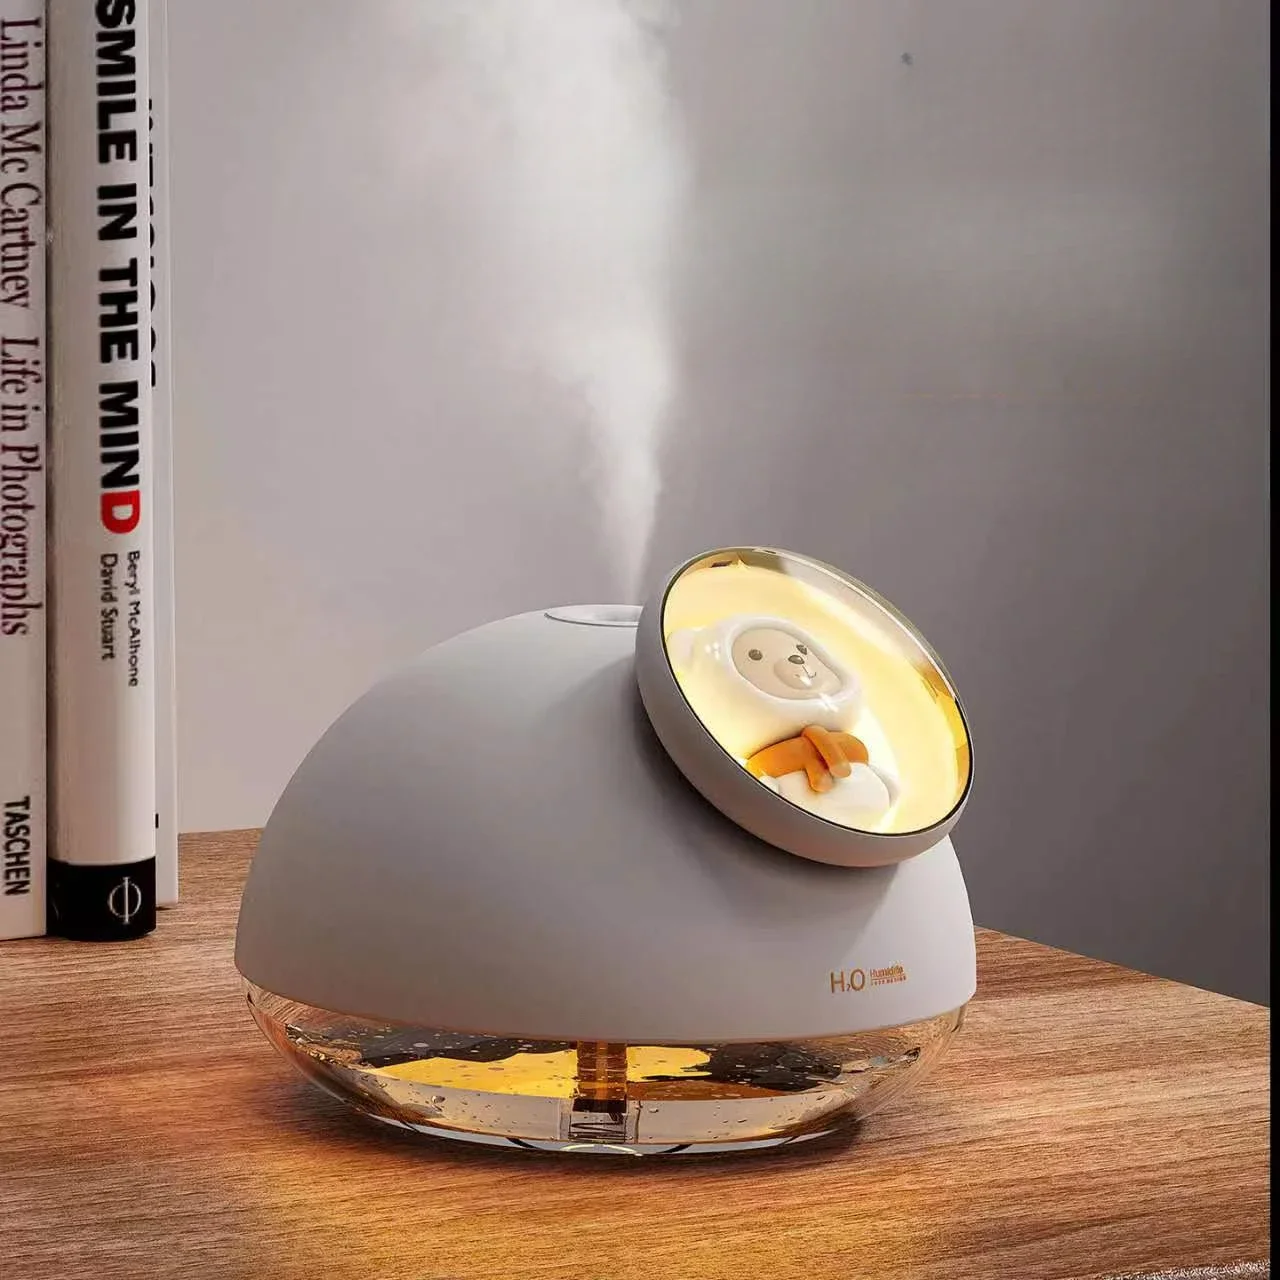 

Mijia High Quality USB Aromatherapy Essential Diffuser Nano Mist Office House Air Humidifier Mini with Colorful Atmosphere Light